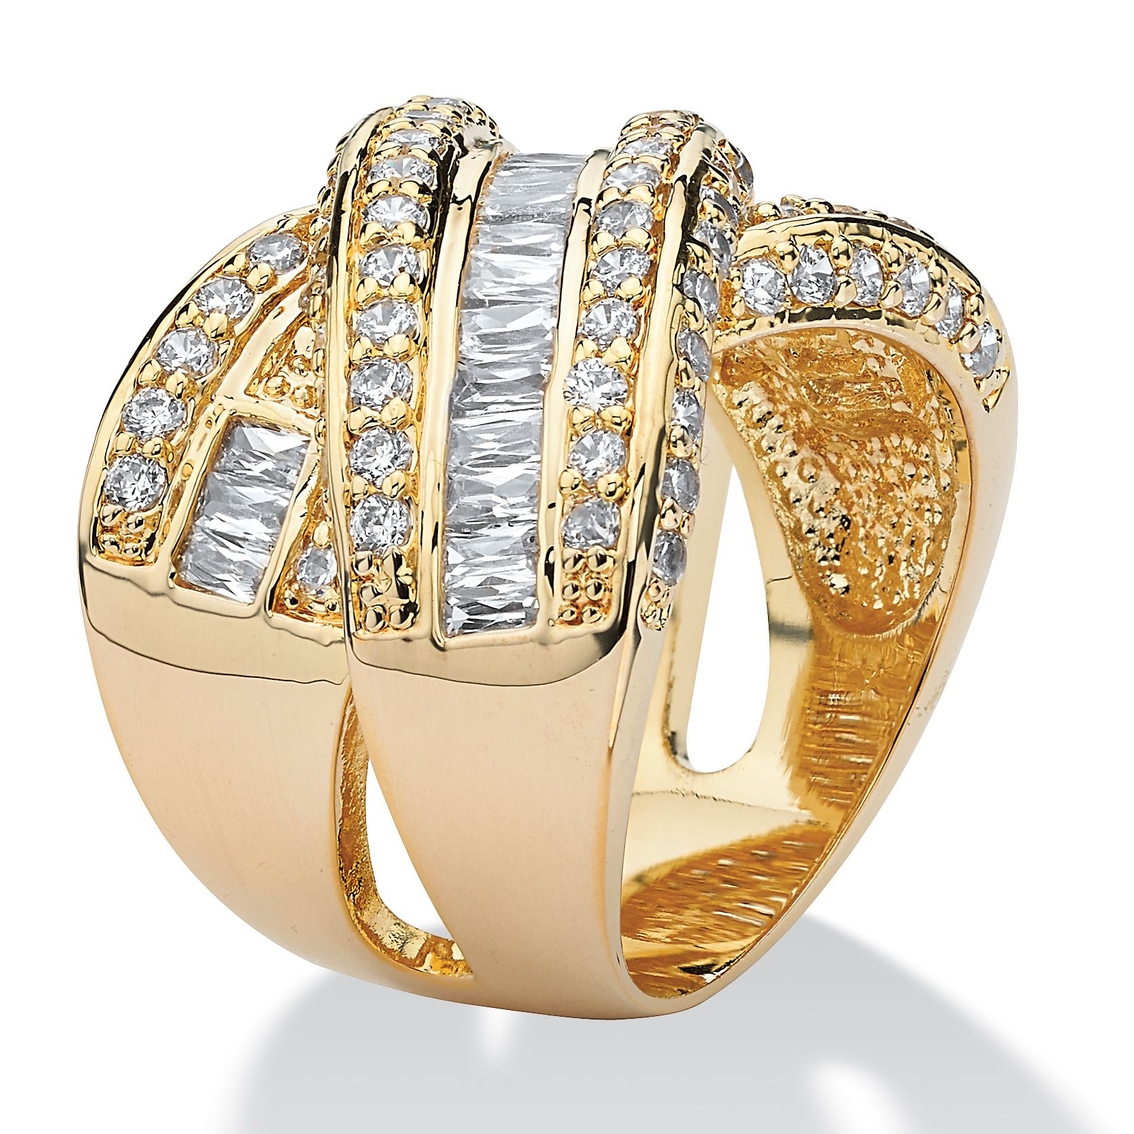 3.64 TCW Baguette Cut Cubic Zirconia Yellow Gold-Plated Crossover Ring - Image 2 of 5